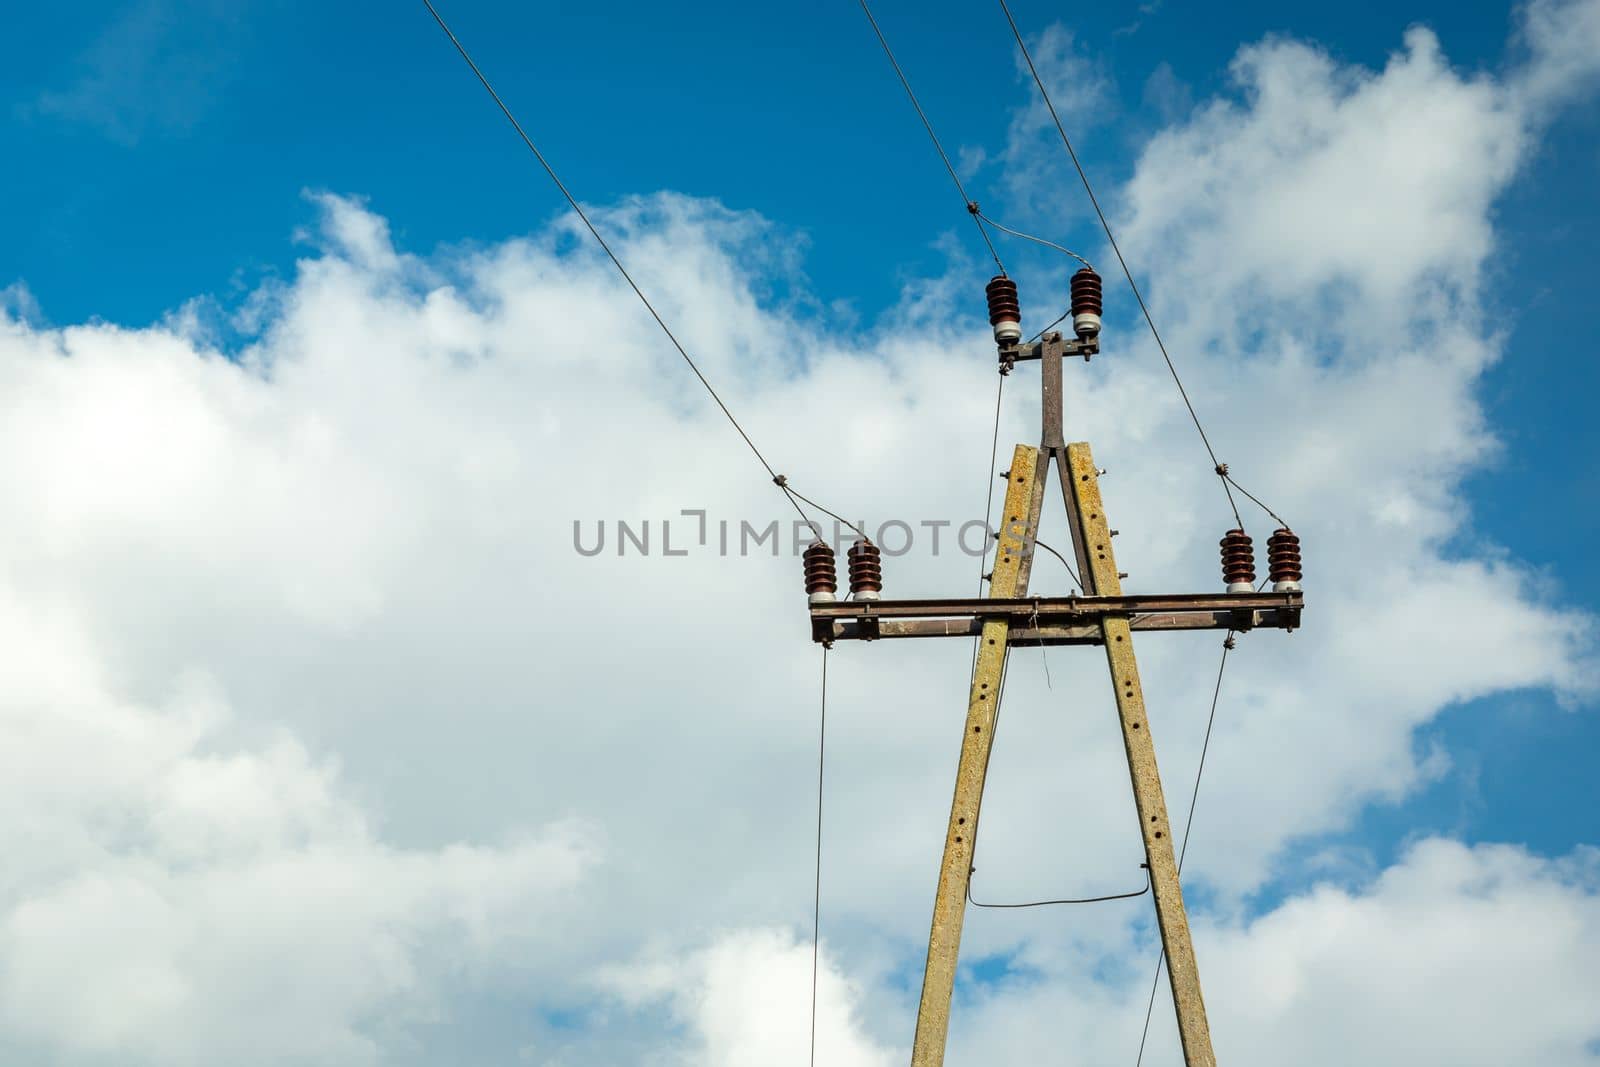 Single concrete electric pole with ceramic insulators and wires